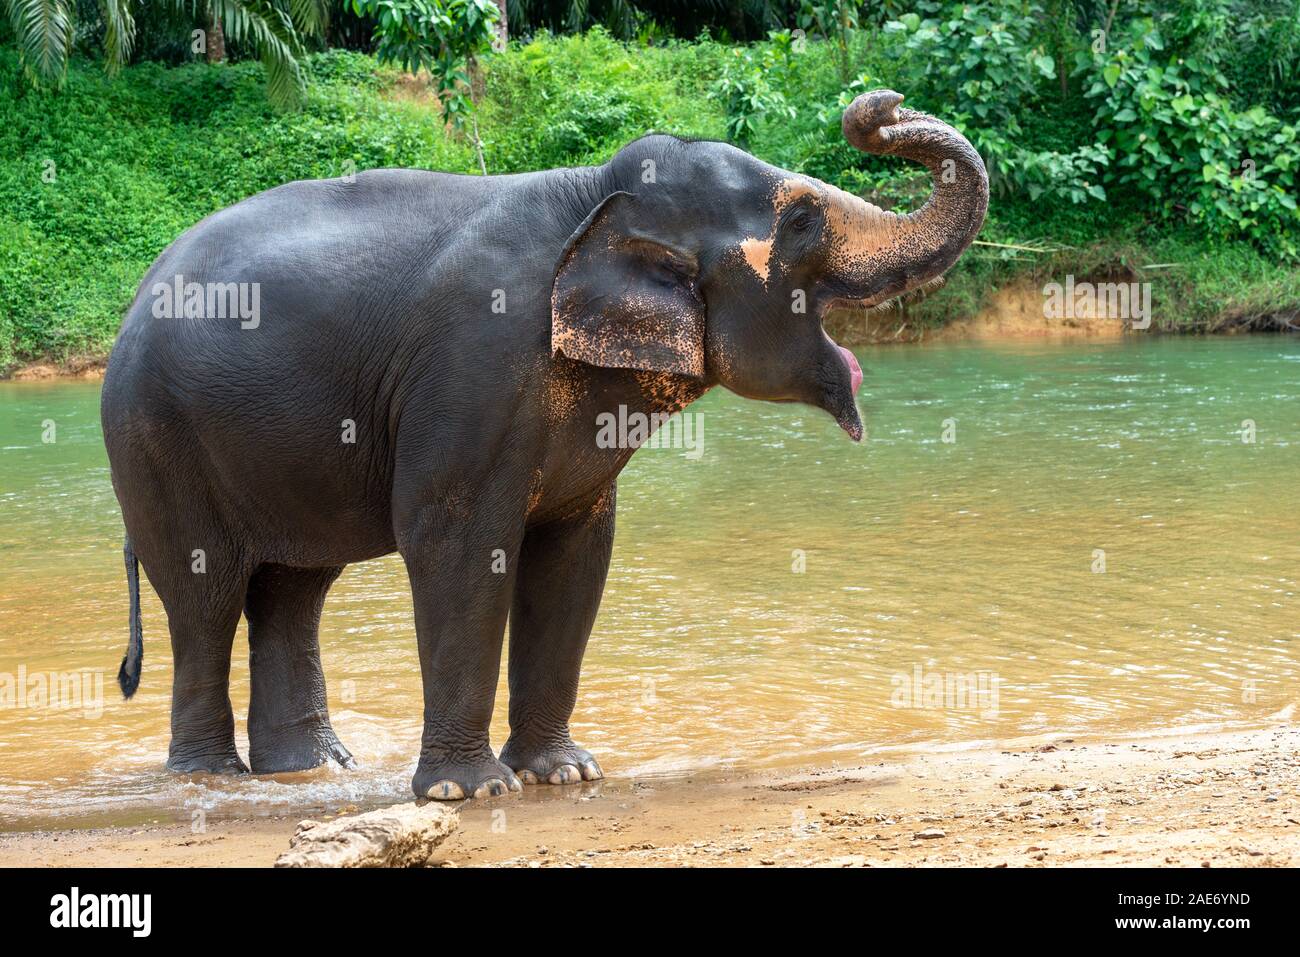 Big Elephant stands and shouts in a river Thailand Stock Photo